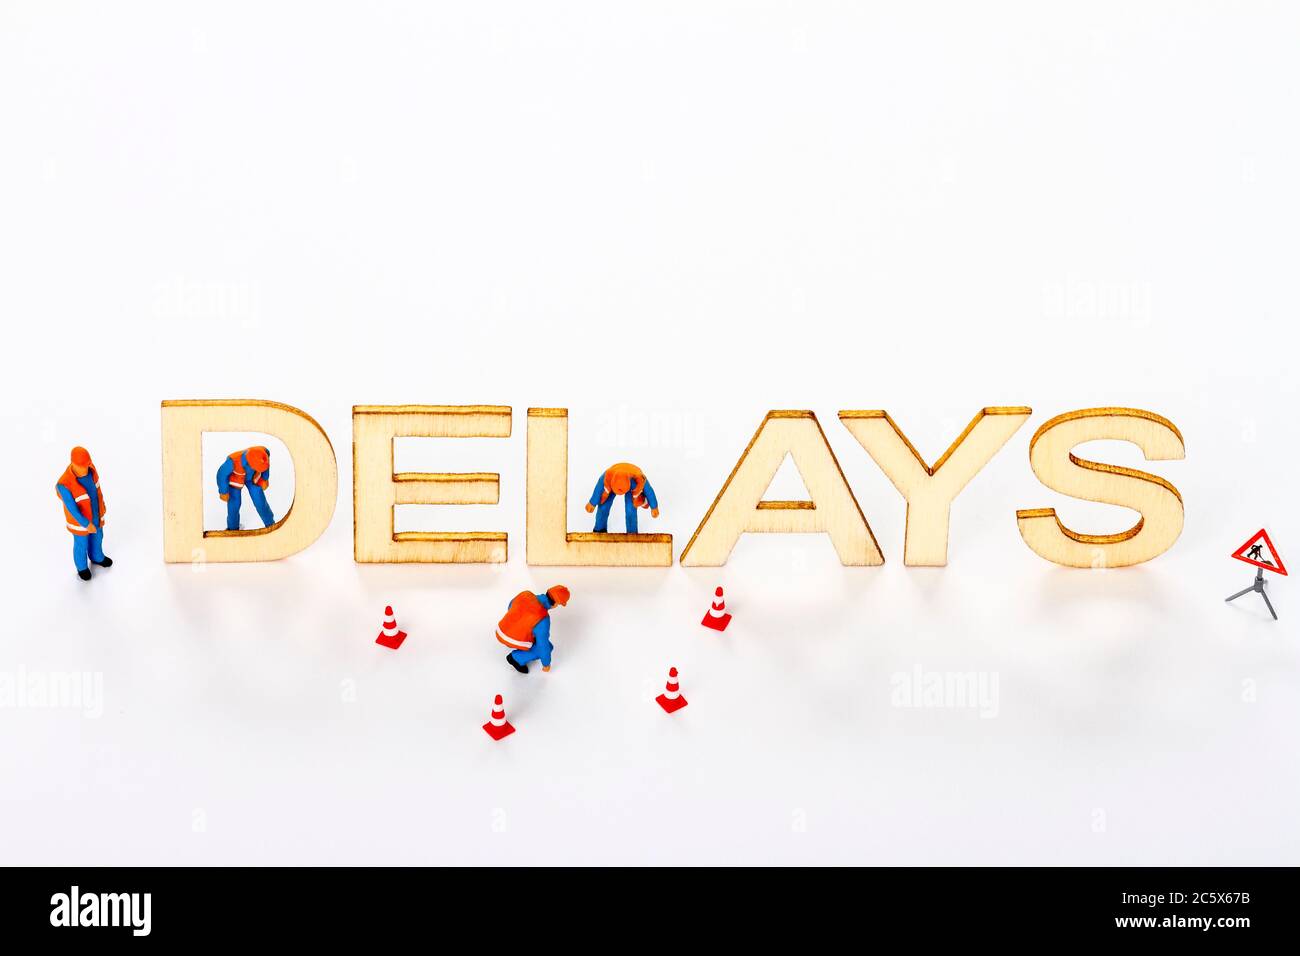 Wooden delays sign with miniature figure workmen and traffic cones Stock Photo